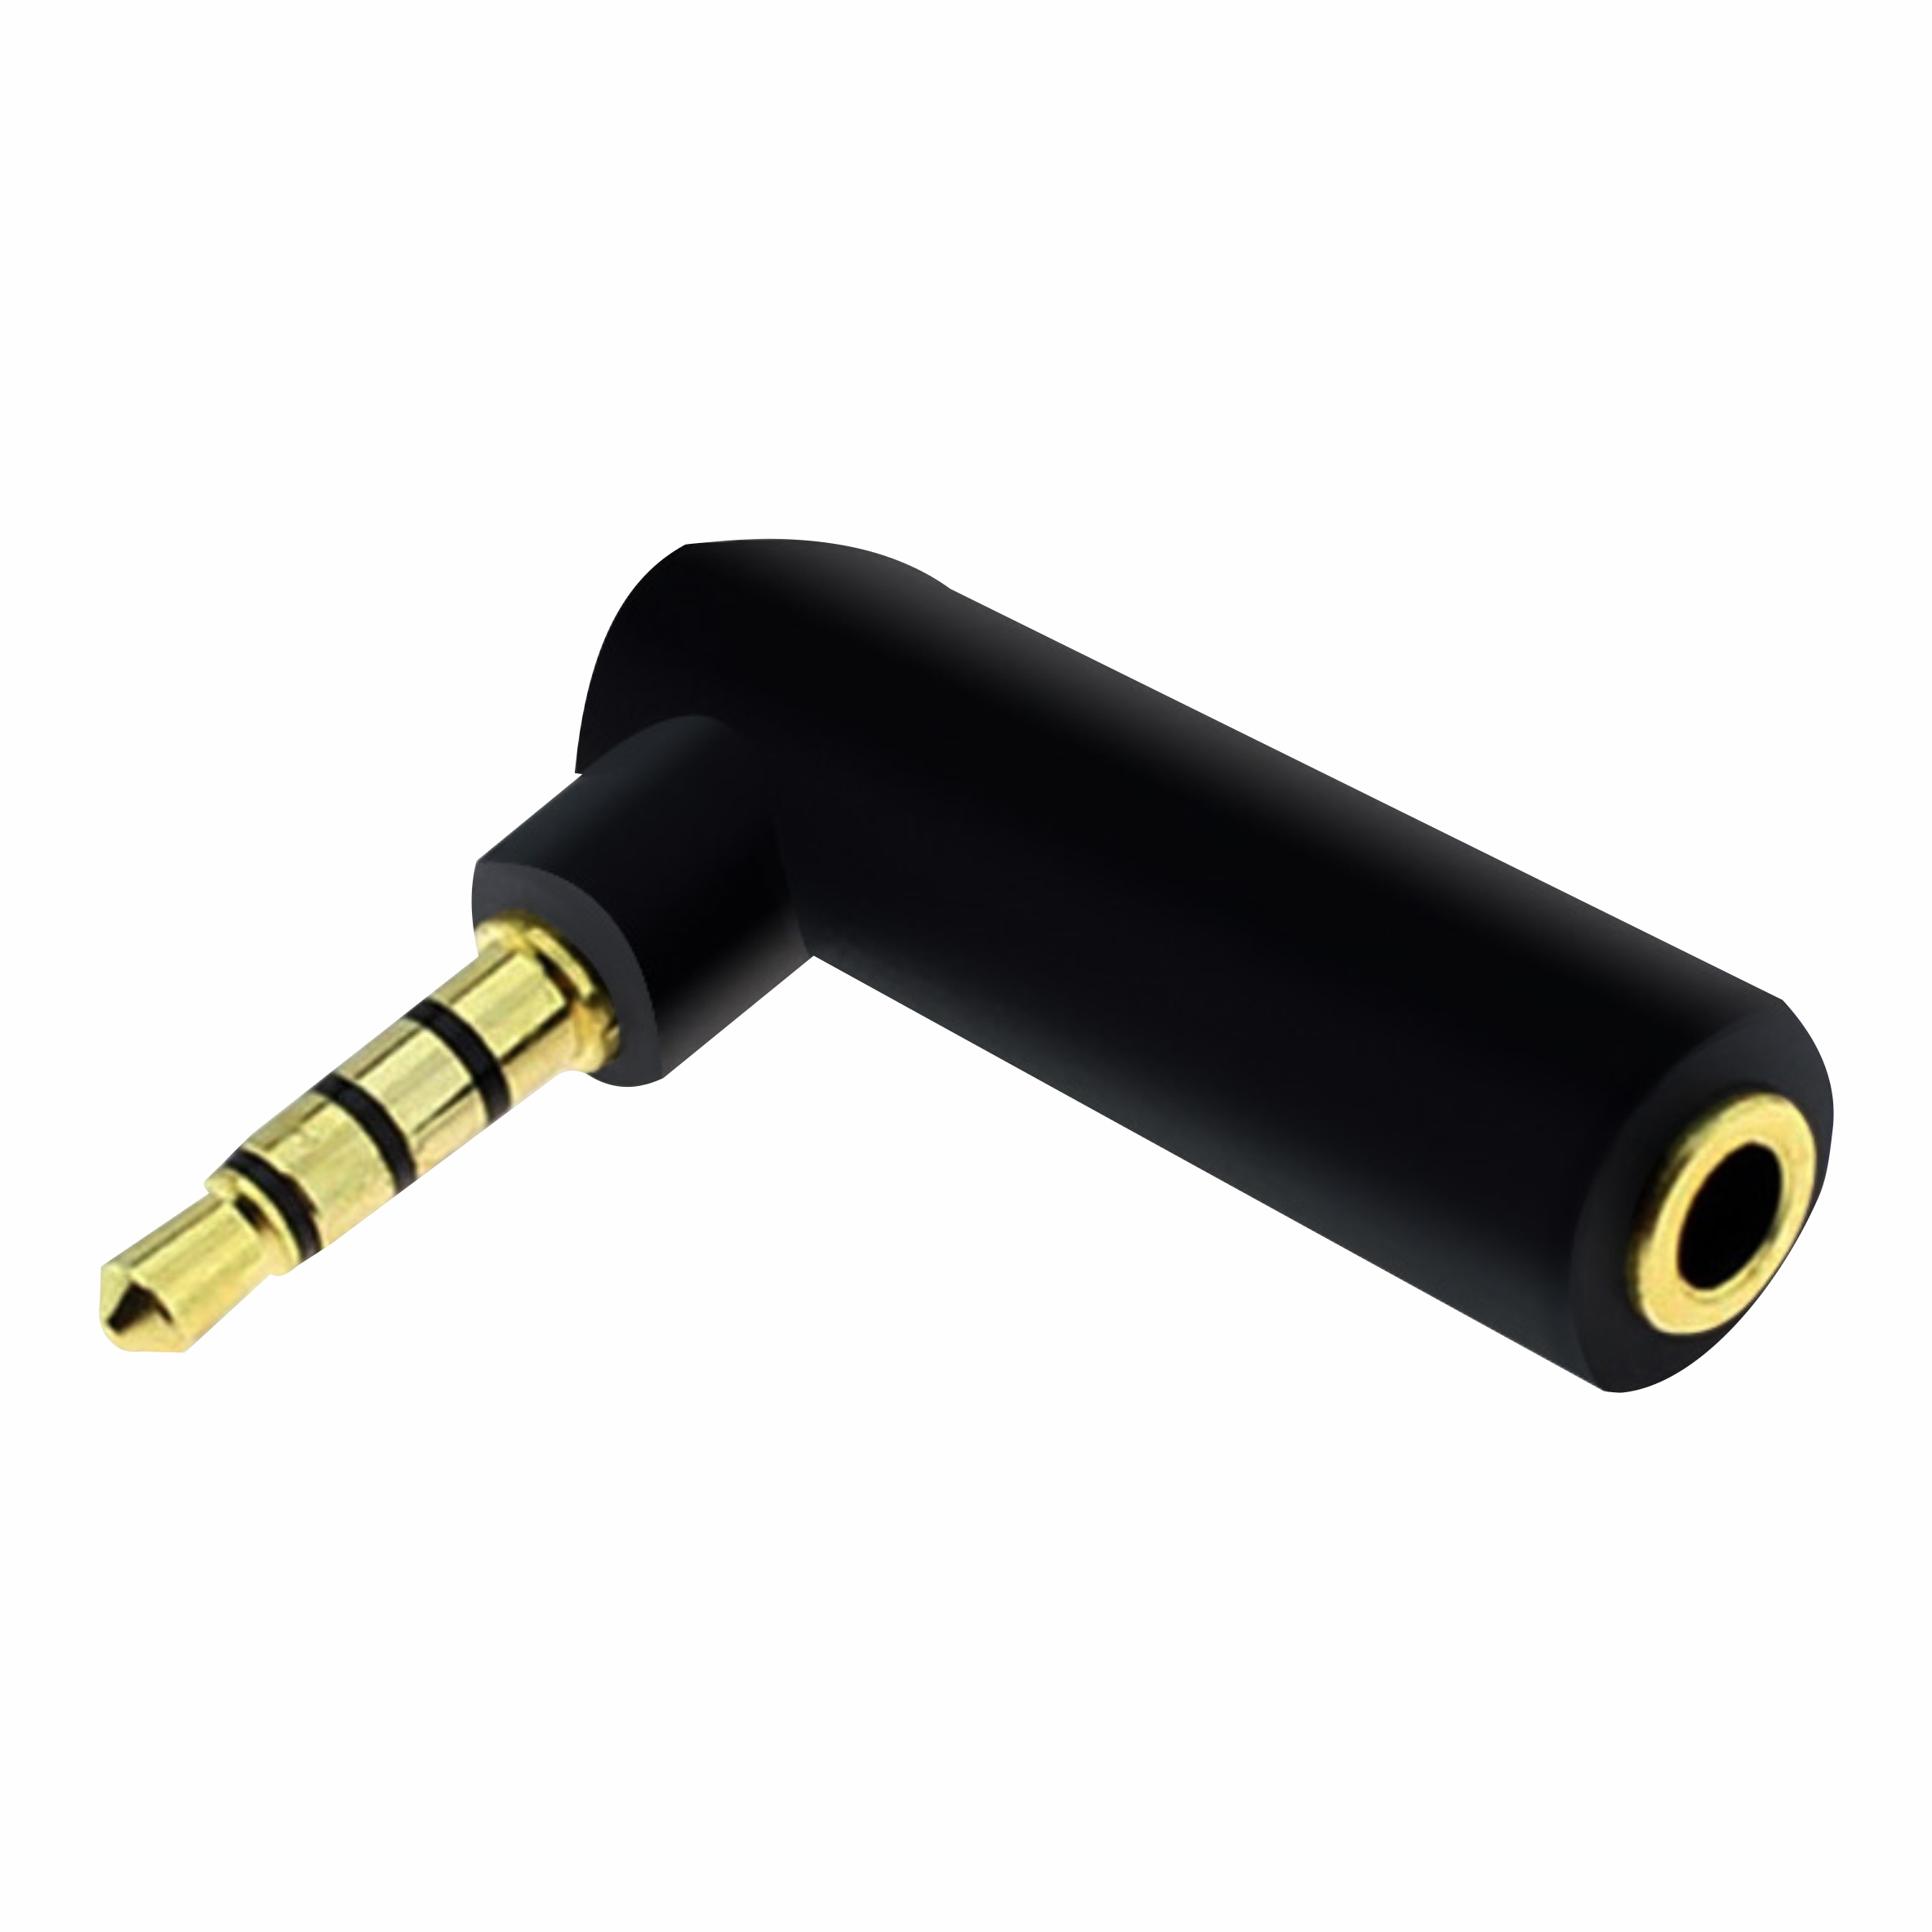 90 Degree 3.5mm Stereo Jack Adapter